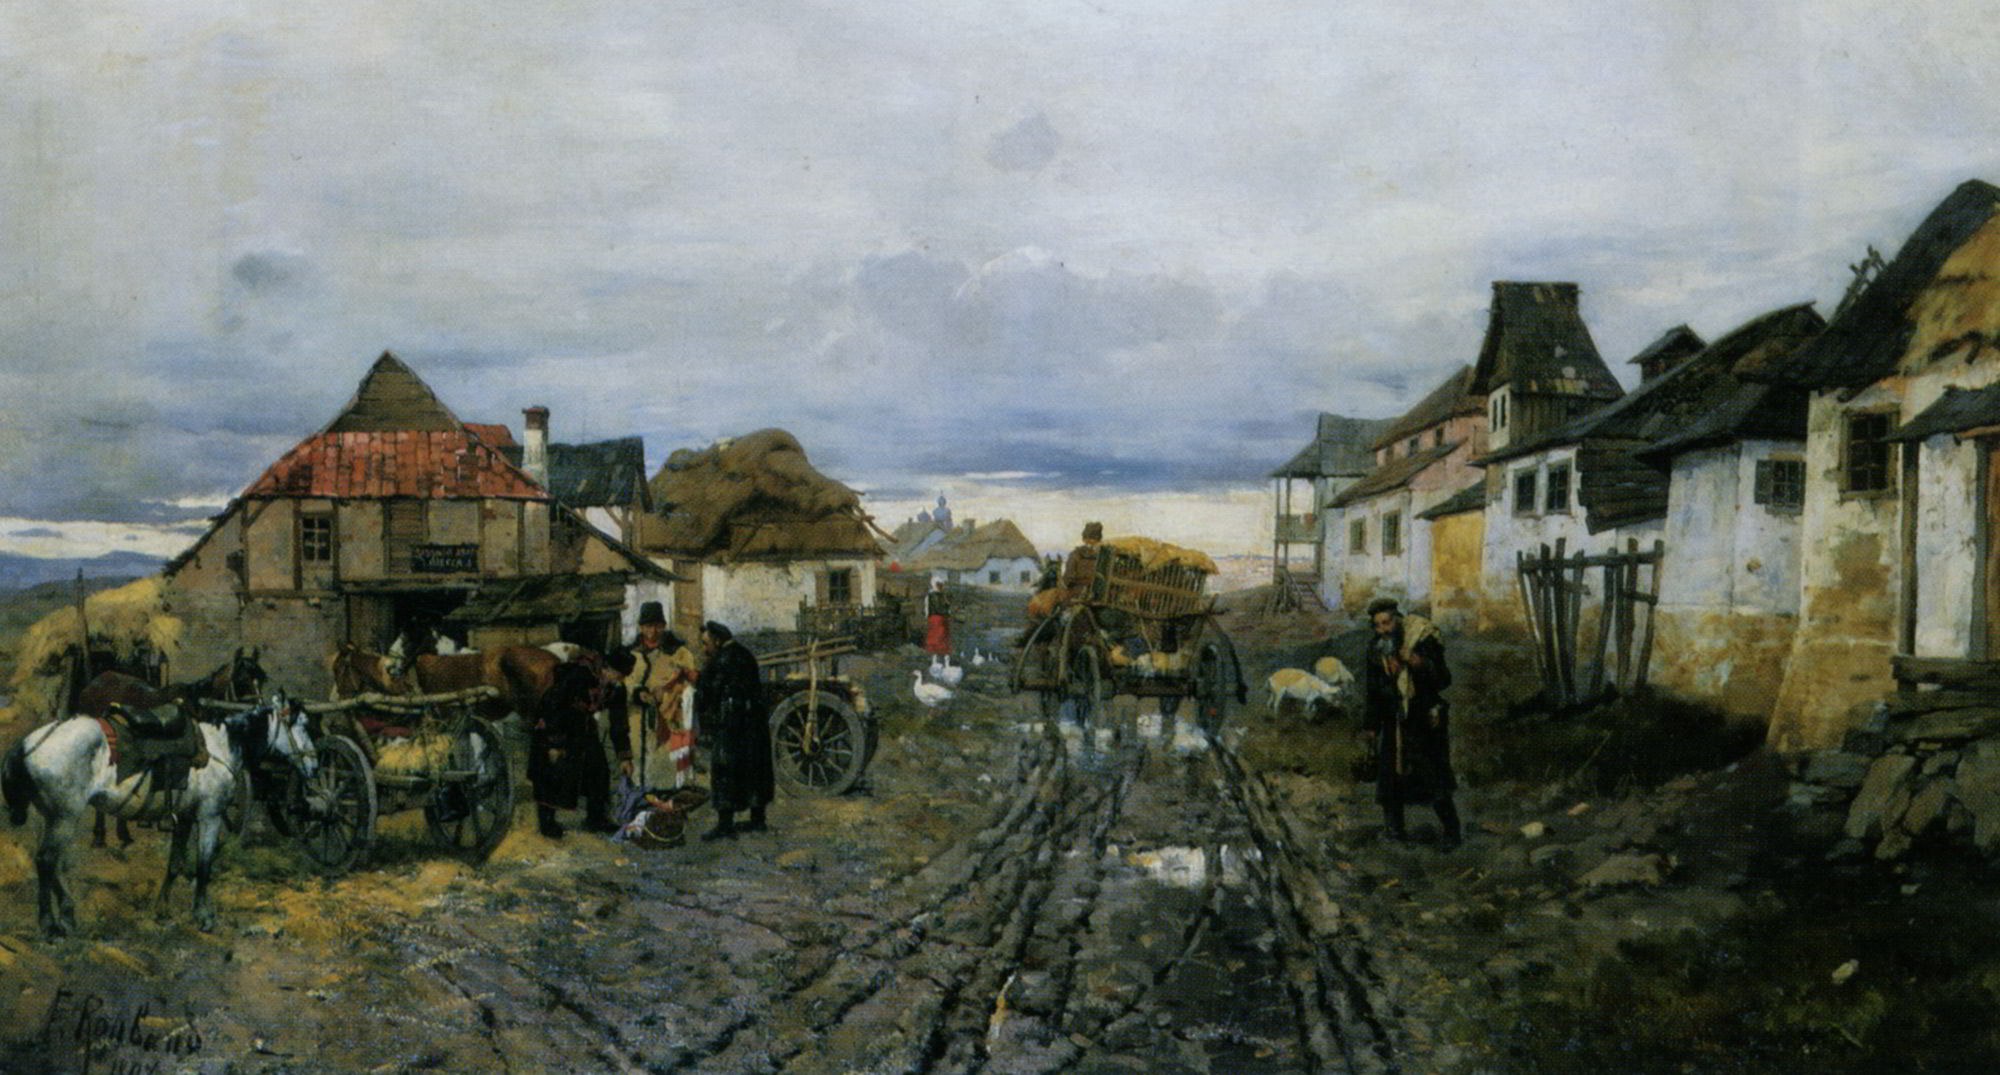 Village Traders by Franz Roubaud-Village Painting